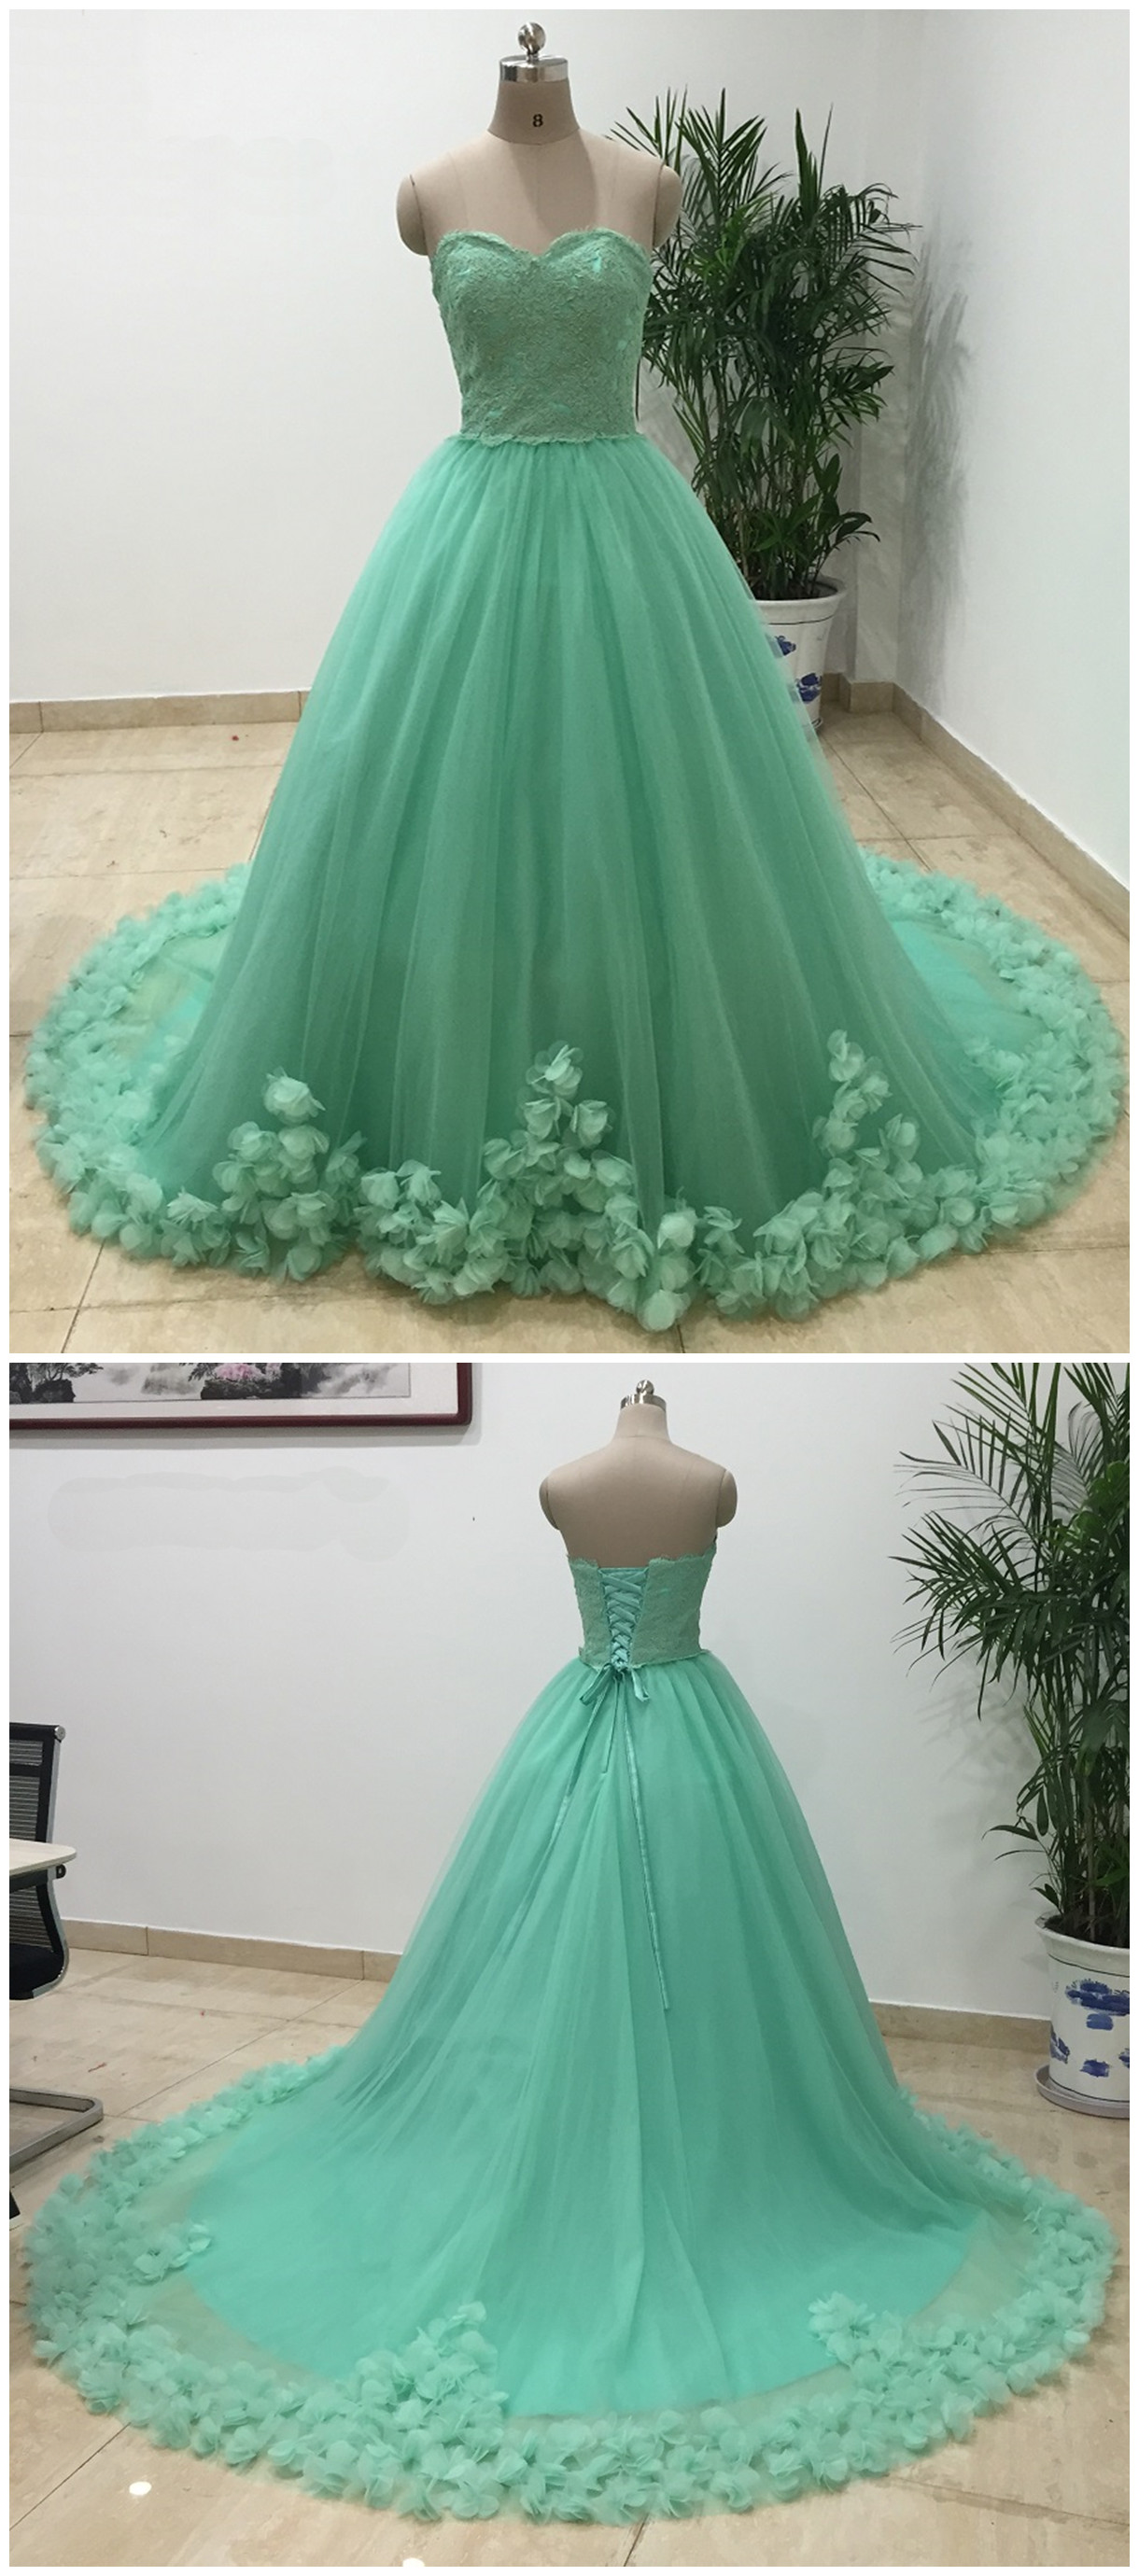 Green Tulle 3d Lace Applique Long Strapless Sweet 16 Prom Dress, Quinceanera Dress